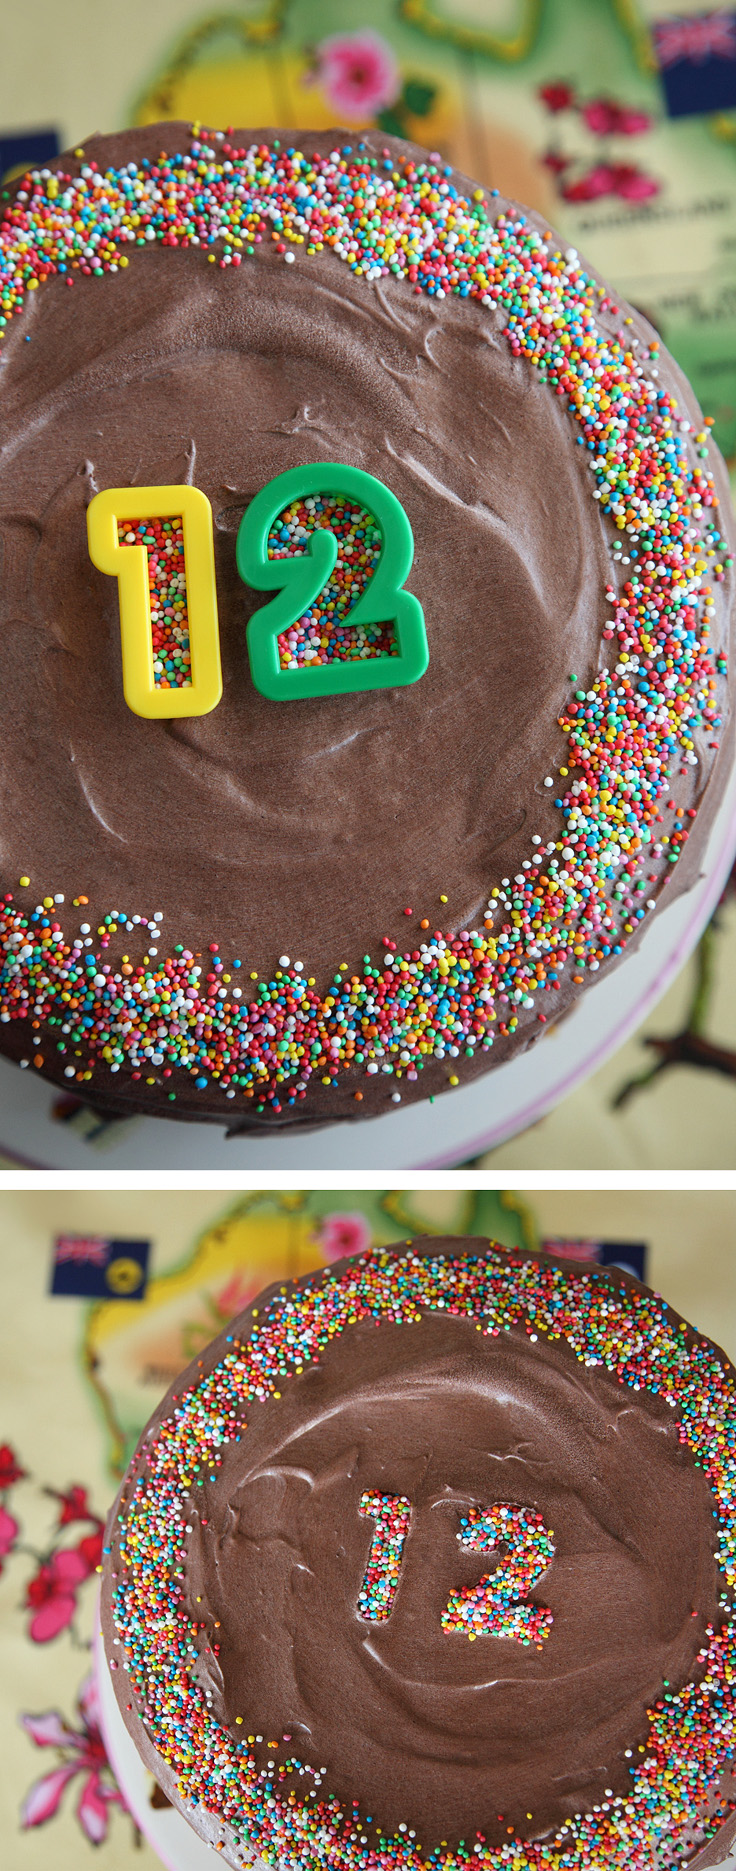 Clever - Use cookie cutters with sprinkles to create a message or write a number on your cake!